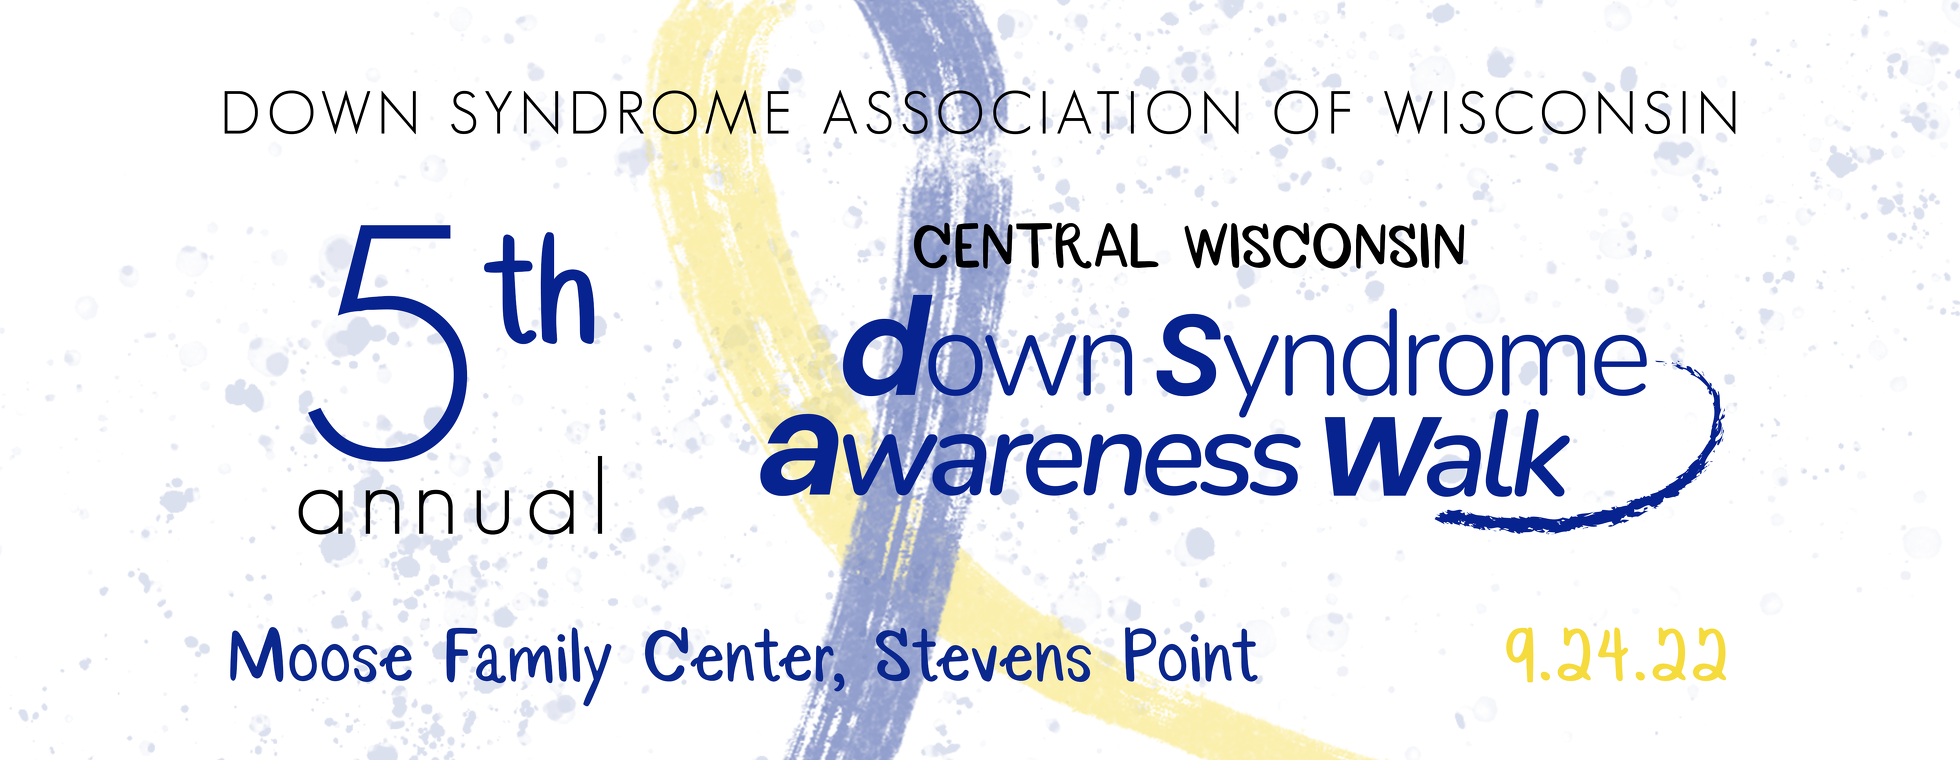 5th Annual DSAW-Central WI Down Syndrome Awareness Walk